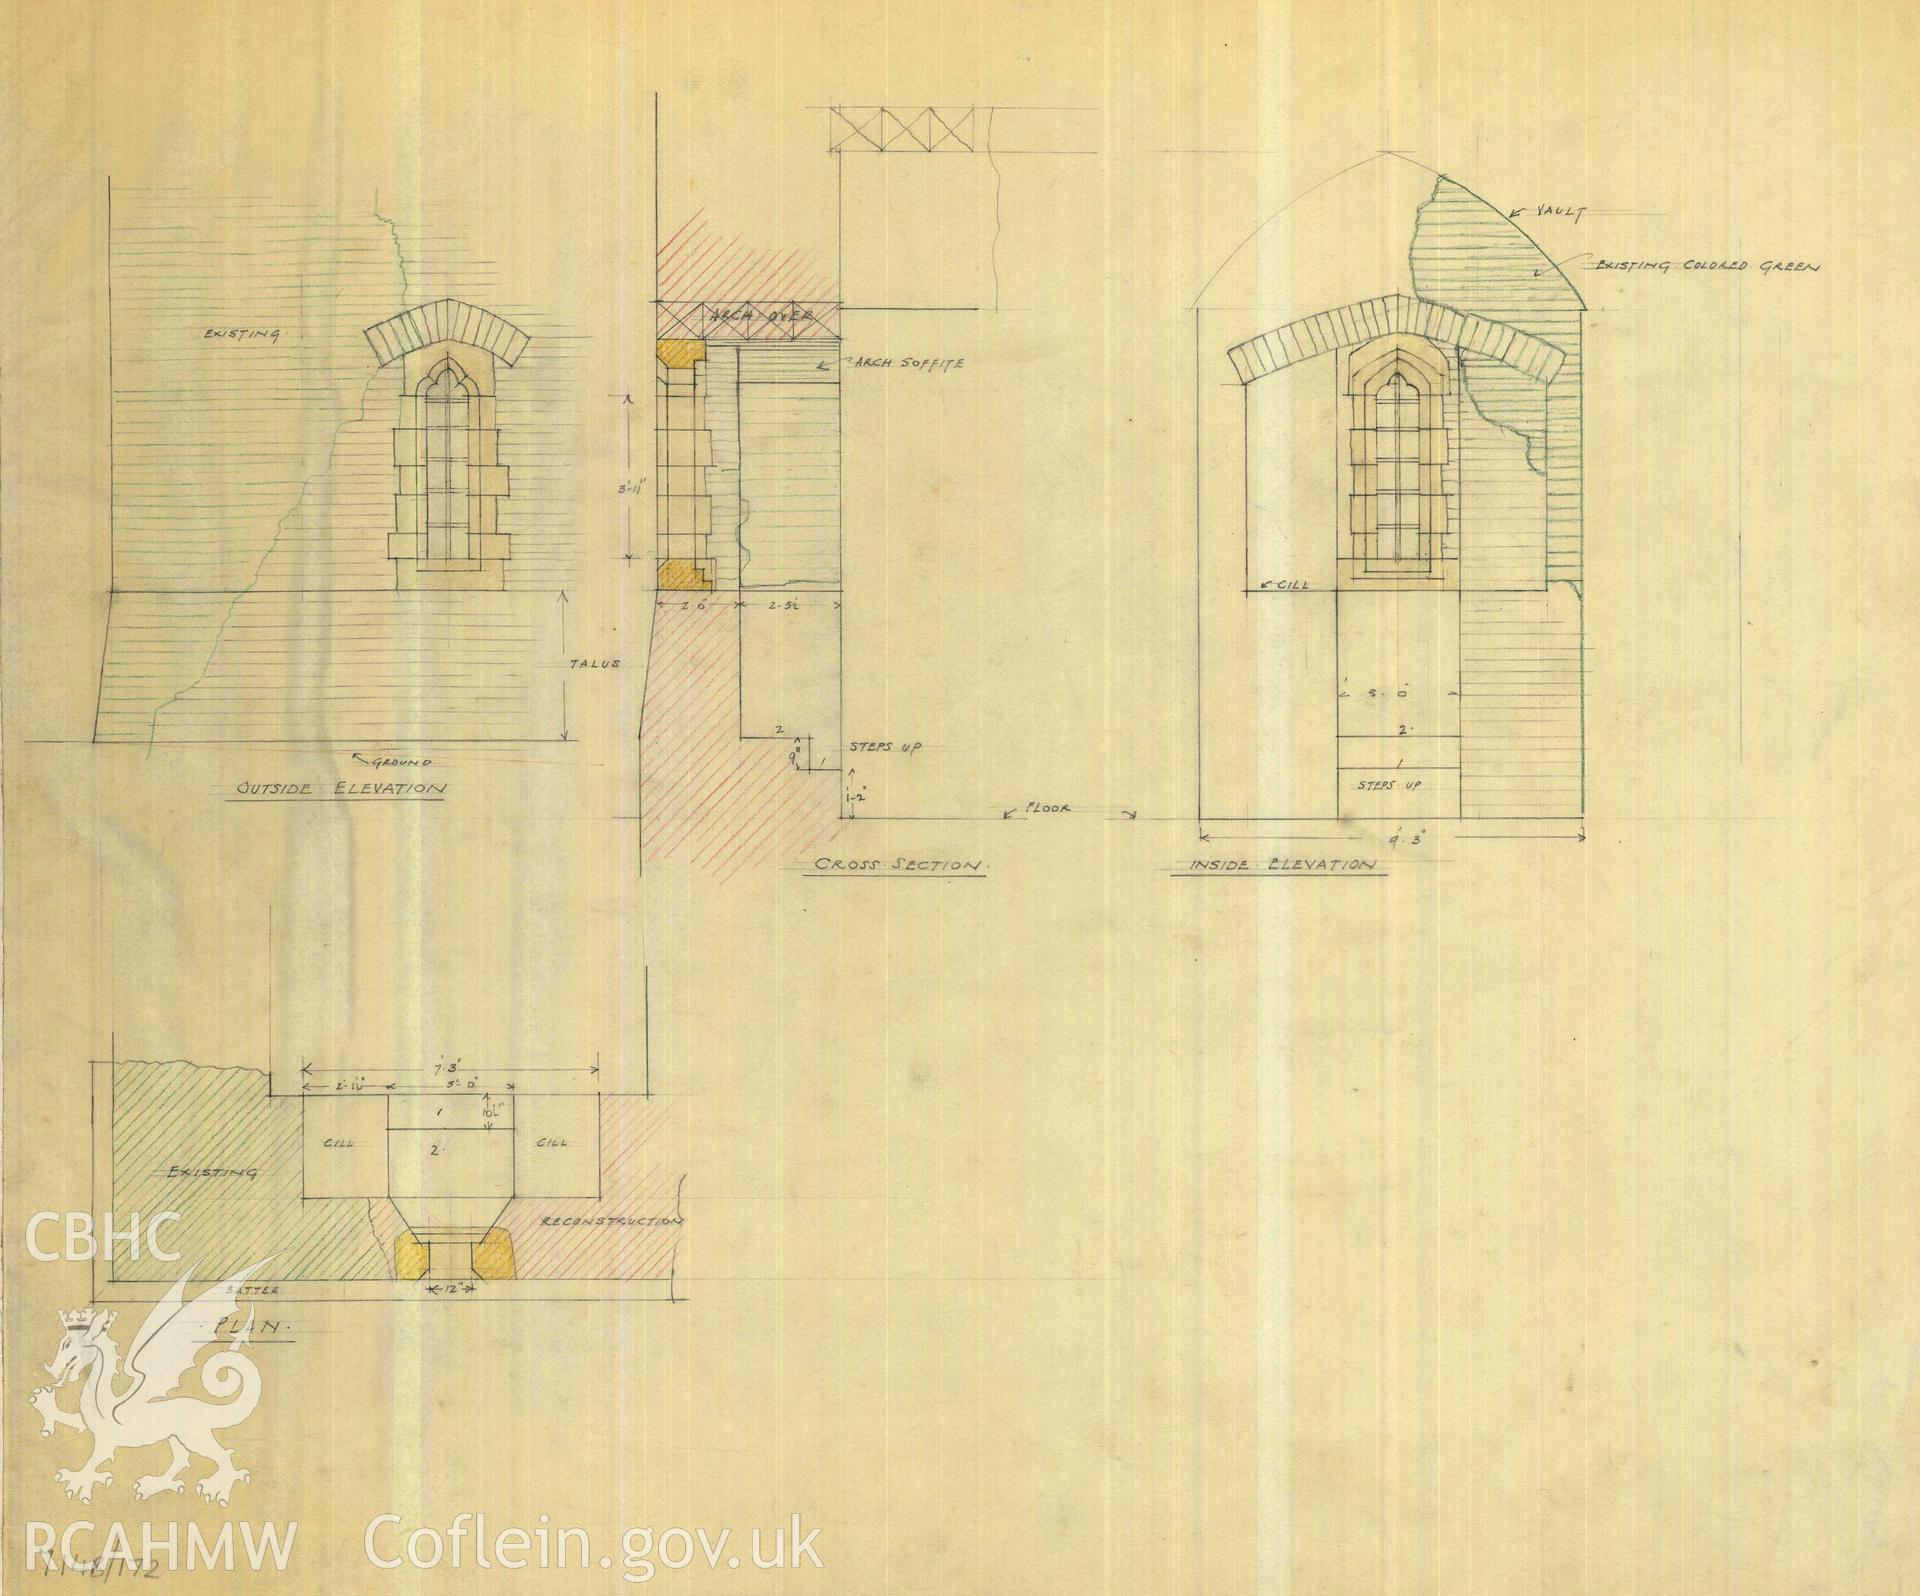 Cadw guardianship monument drawing of Caerphilly Castle. Dam, S gate, window details. Cadw Ref. No:714B/172. Scale 1:24.